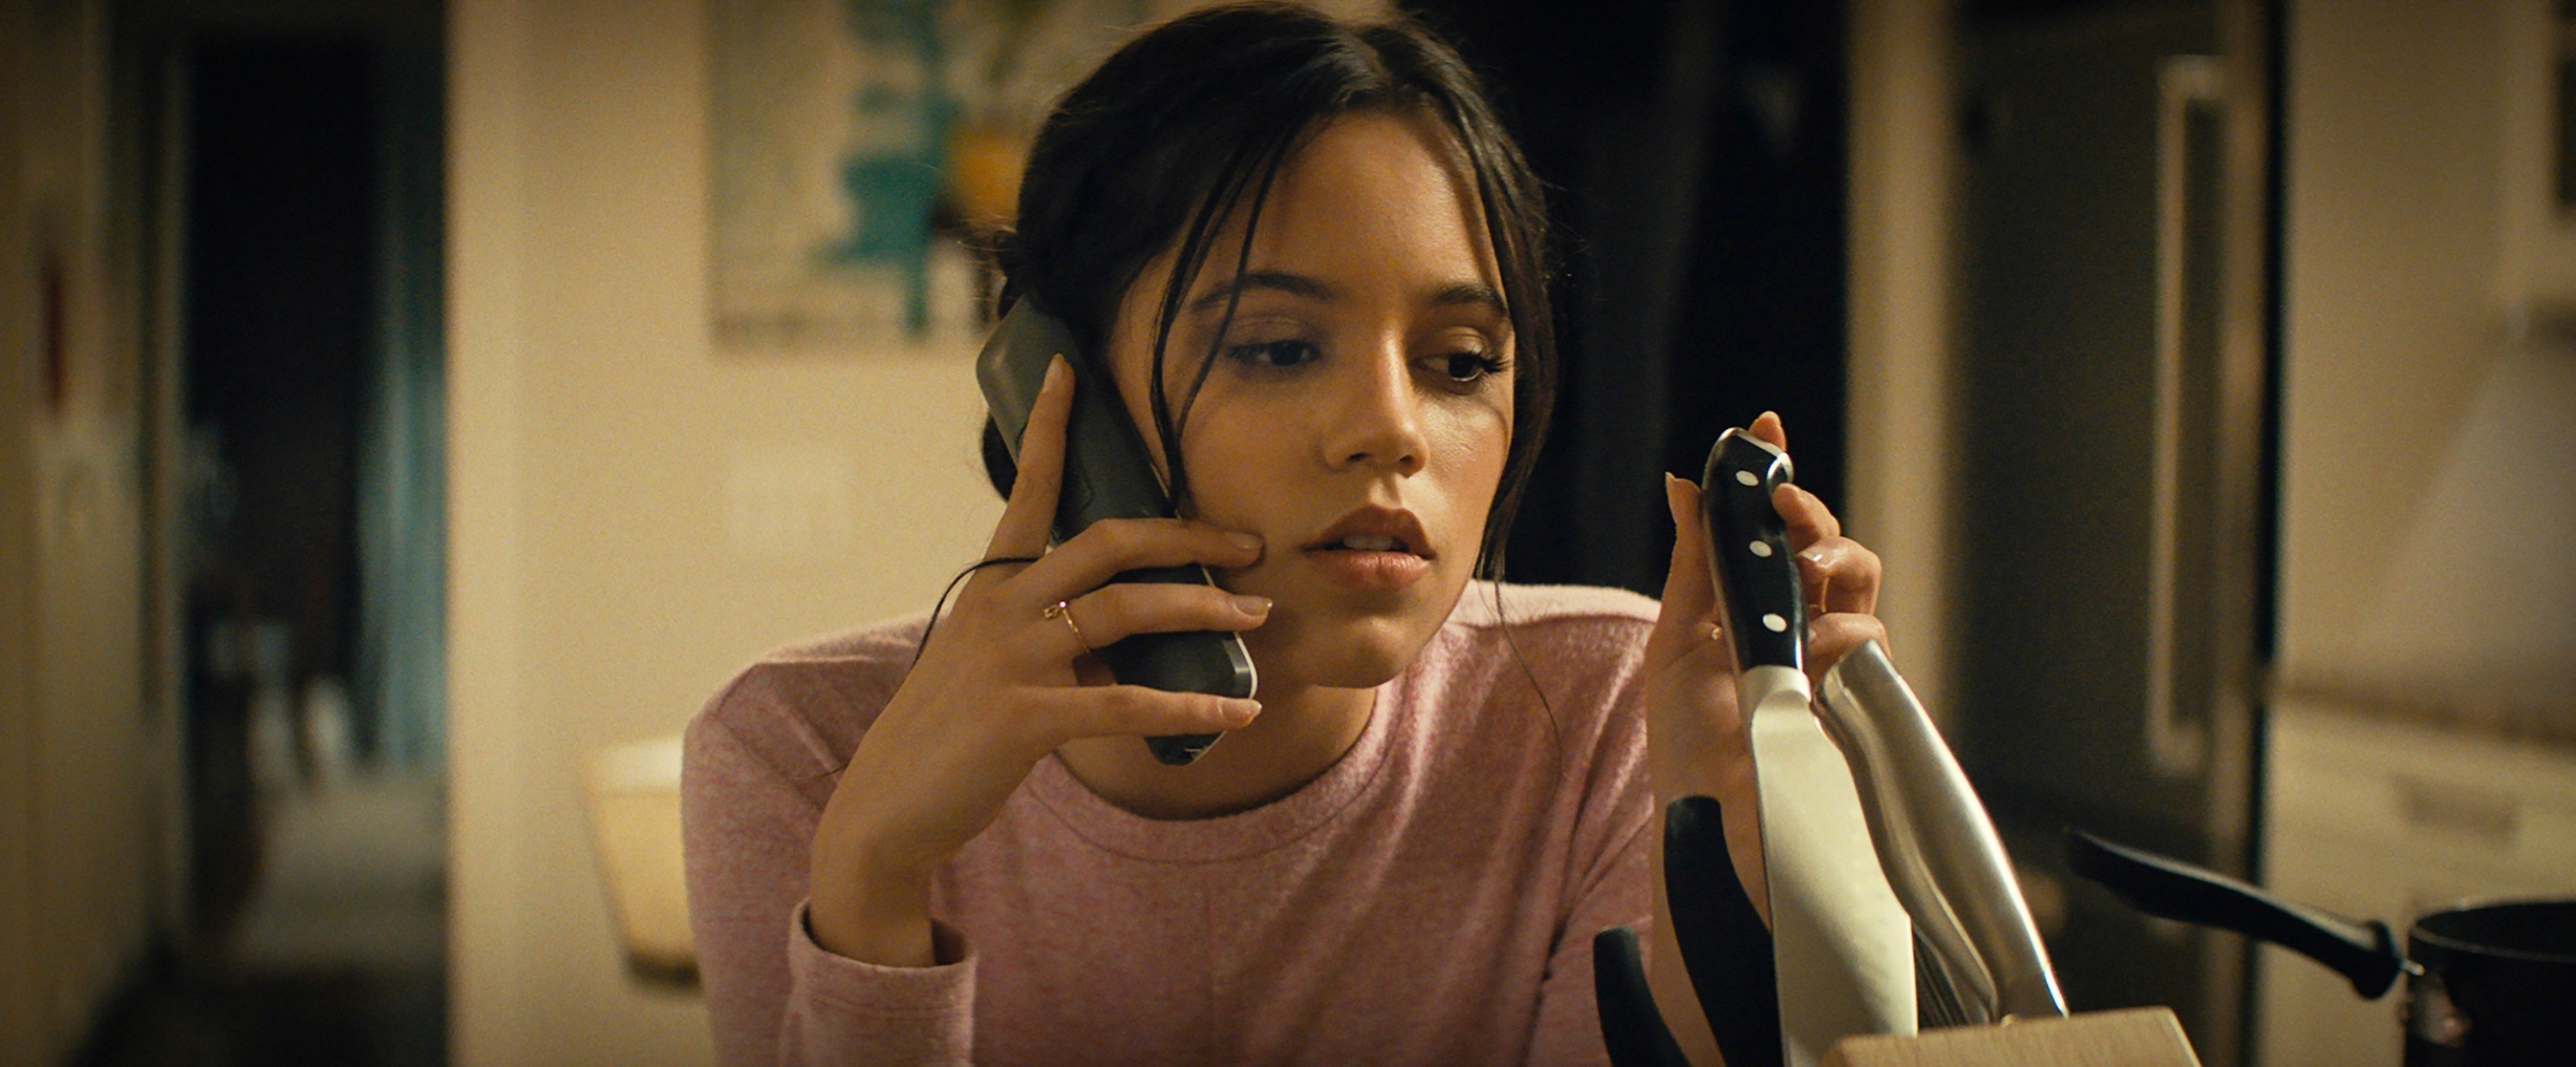 A close up of Jenna Ortega as she wears a sweater while playing with a knife block